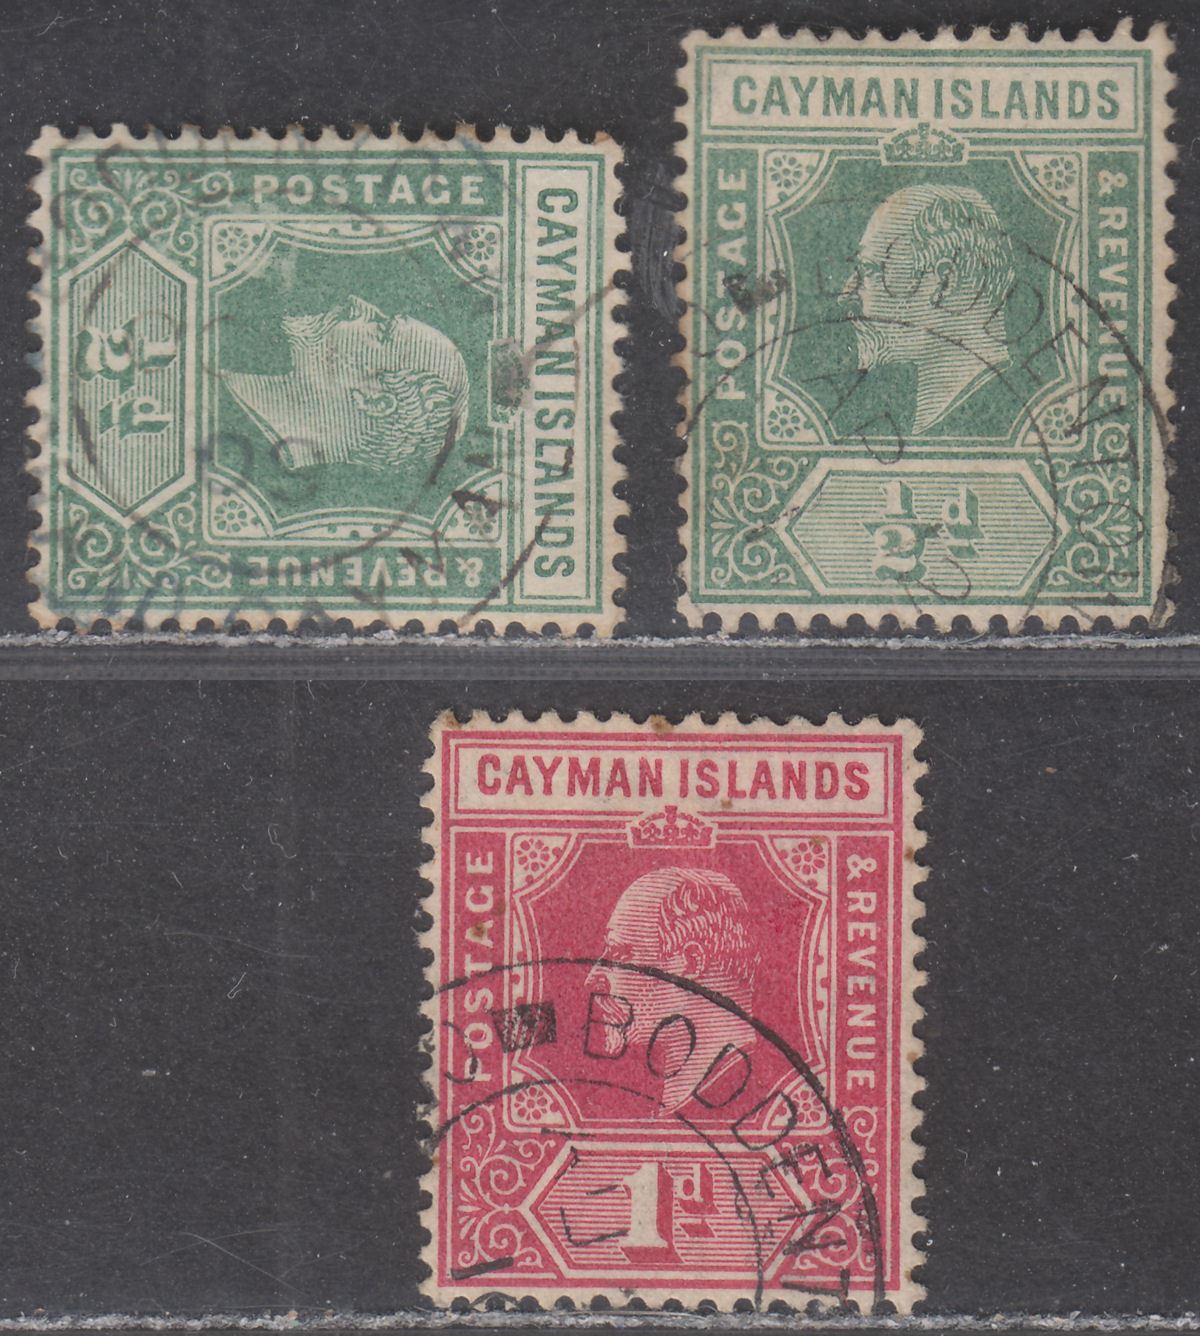 Cayman Islands 1907 KEVII ½d x2, 1d Used with BODDENTOWN postmarks